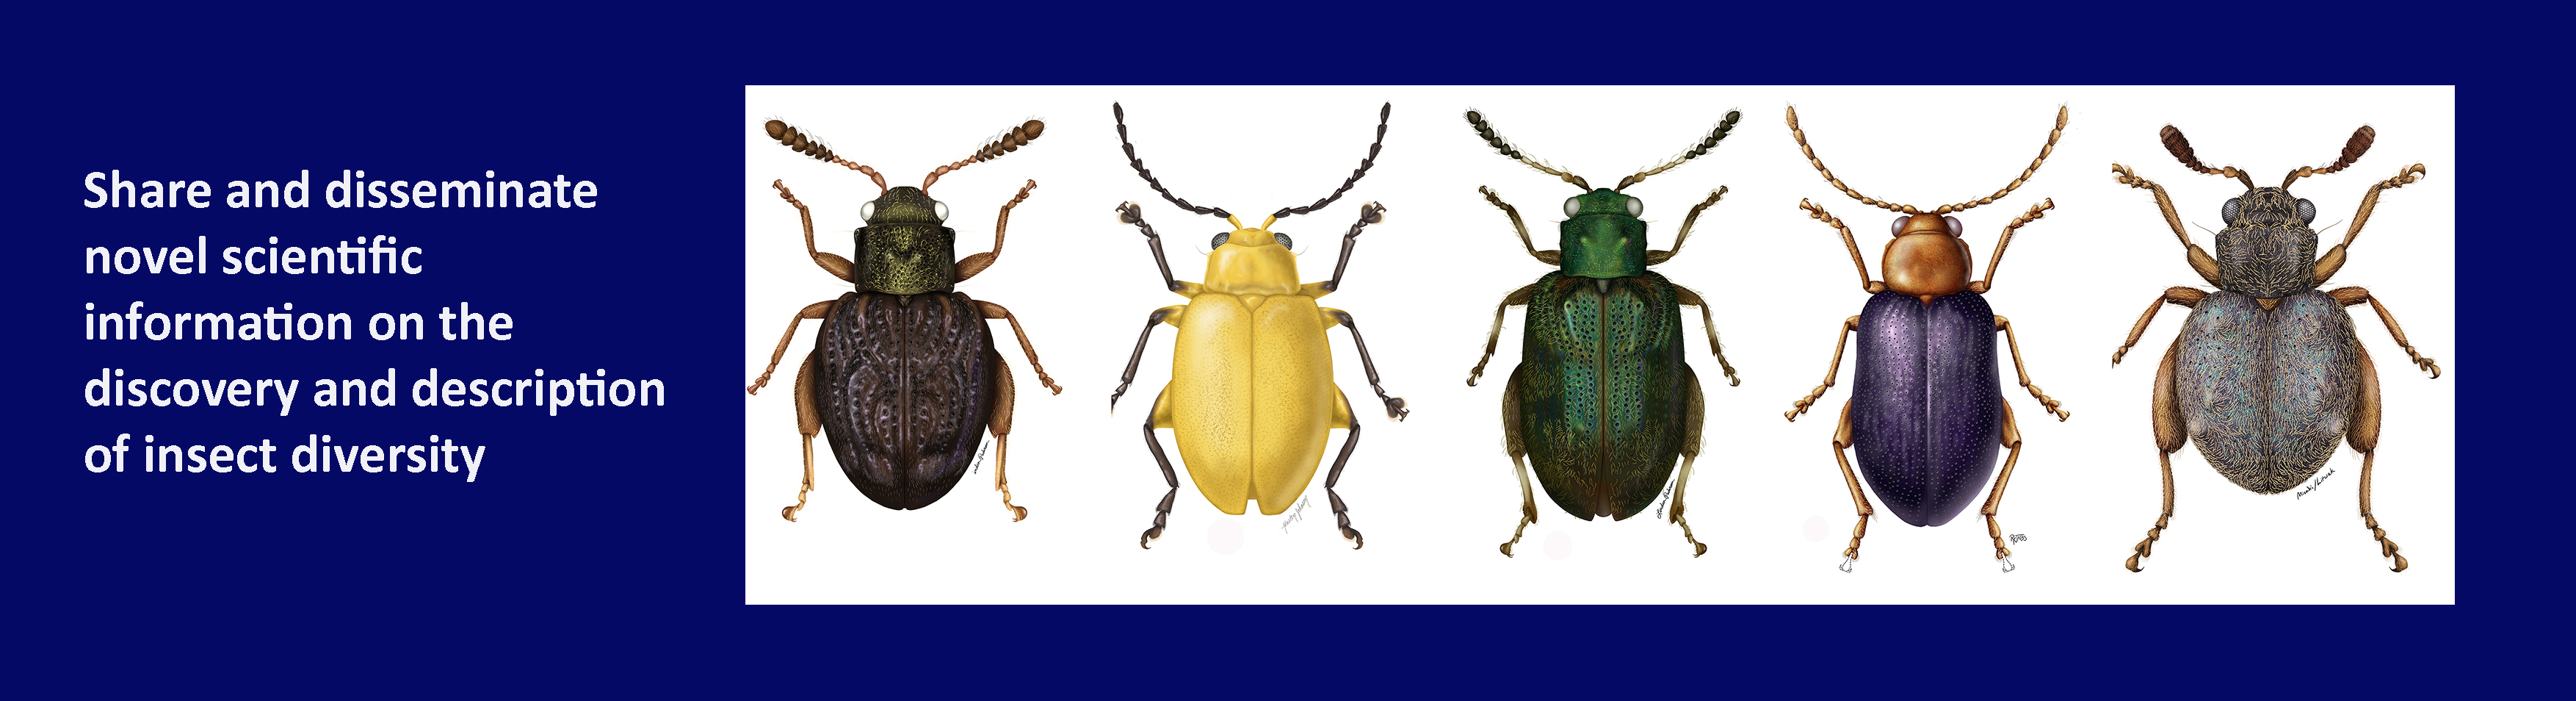 Journal of Insect Biodiversity Banner Image